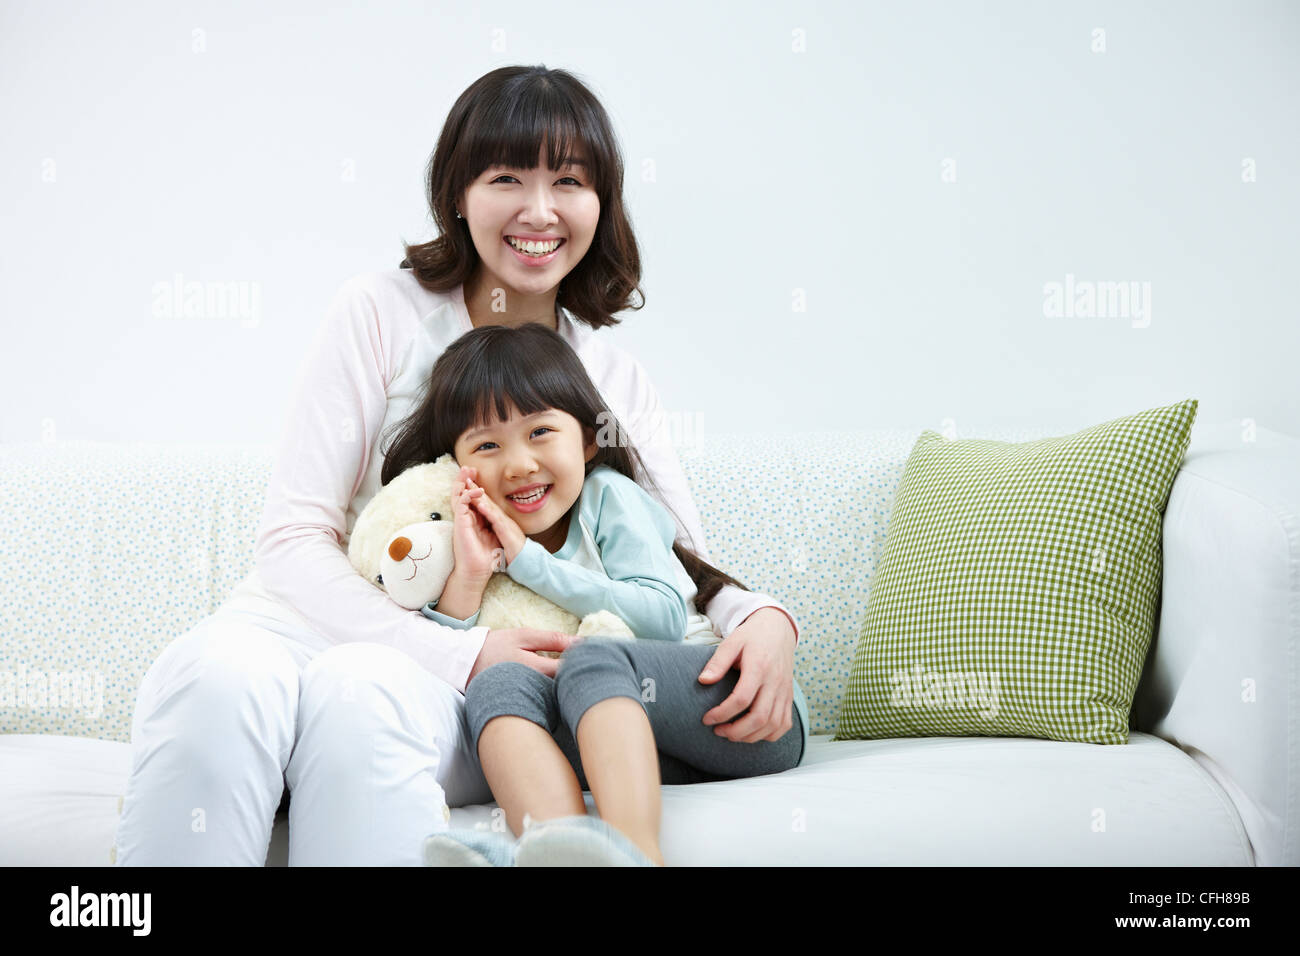 The woman and girl sitting with the teddy bear Stock Photo